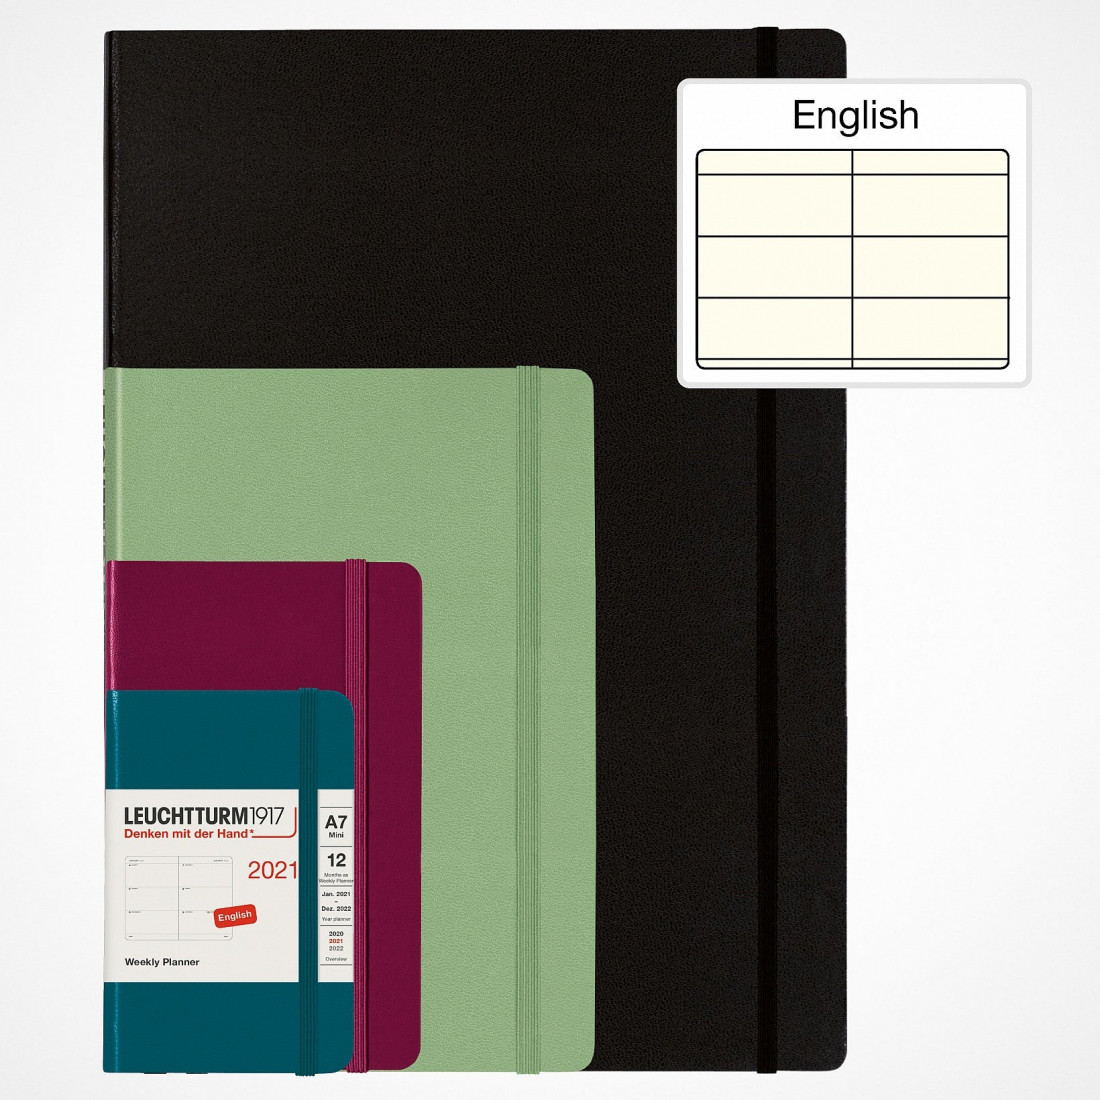 Leuchtturm 1917 Weekly Planner and Notebook 2024 Port Red Pocket A6 Soft Cover